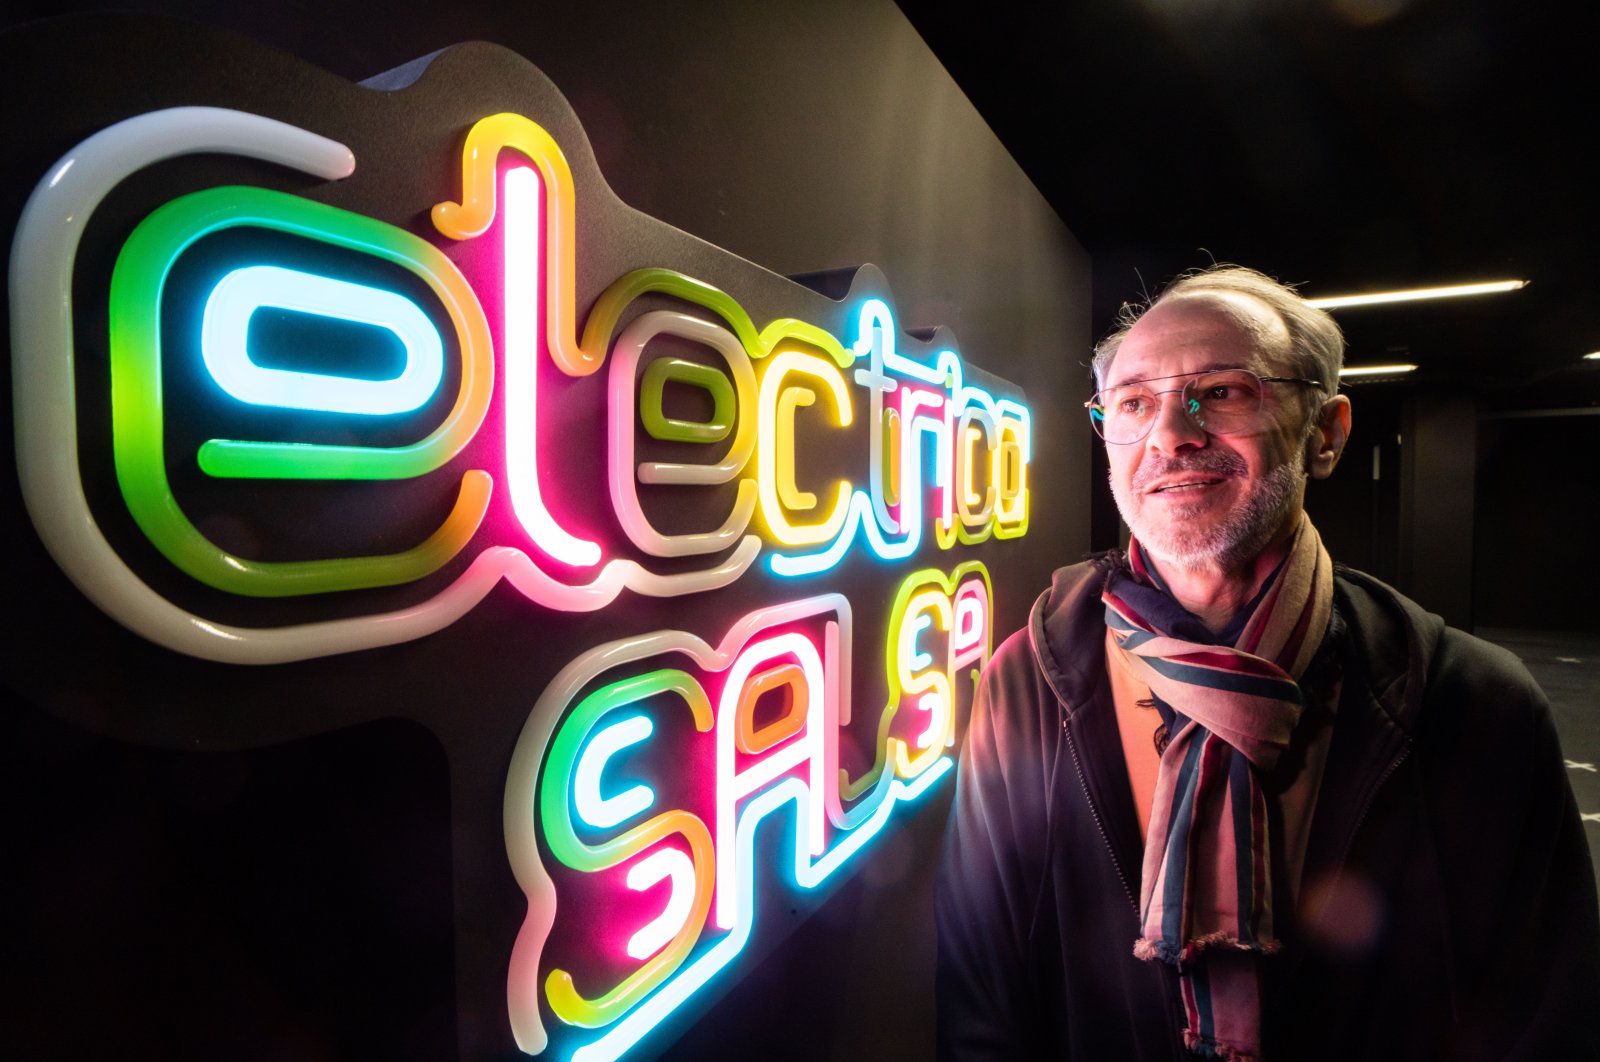 MOMEM director Alex Azary shows off a neon sign that responds to sounds. (DPA)